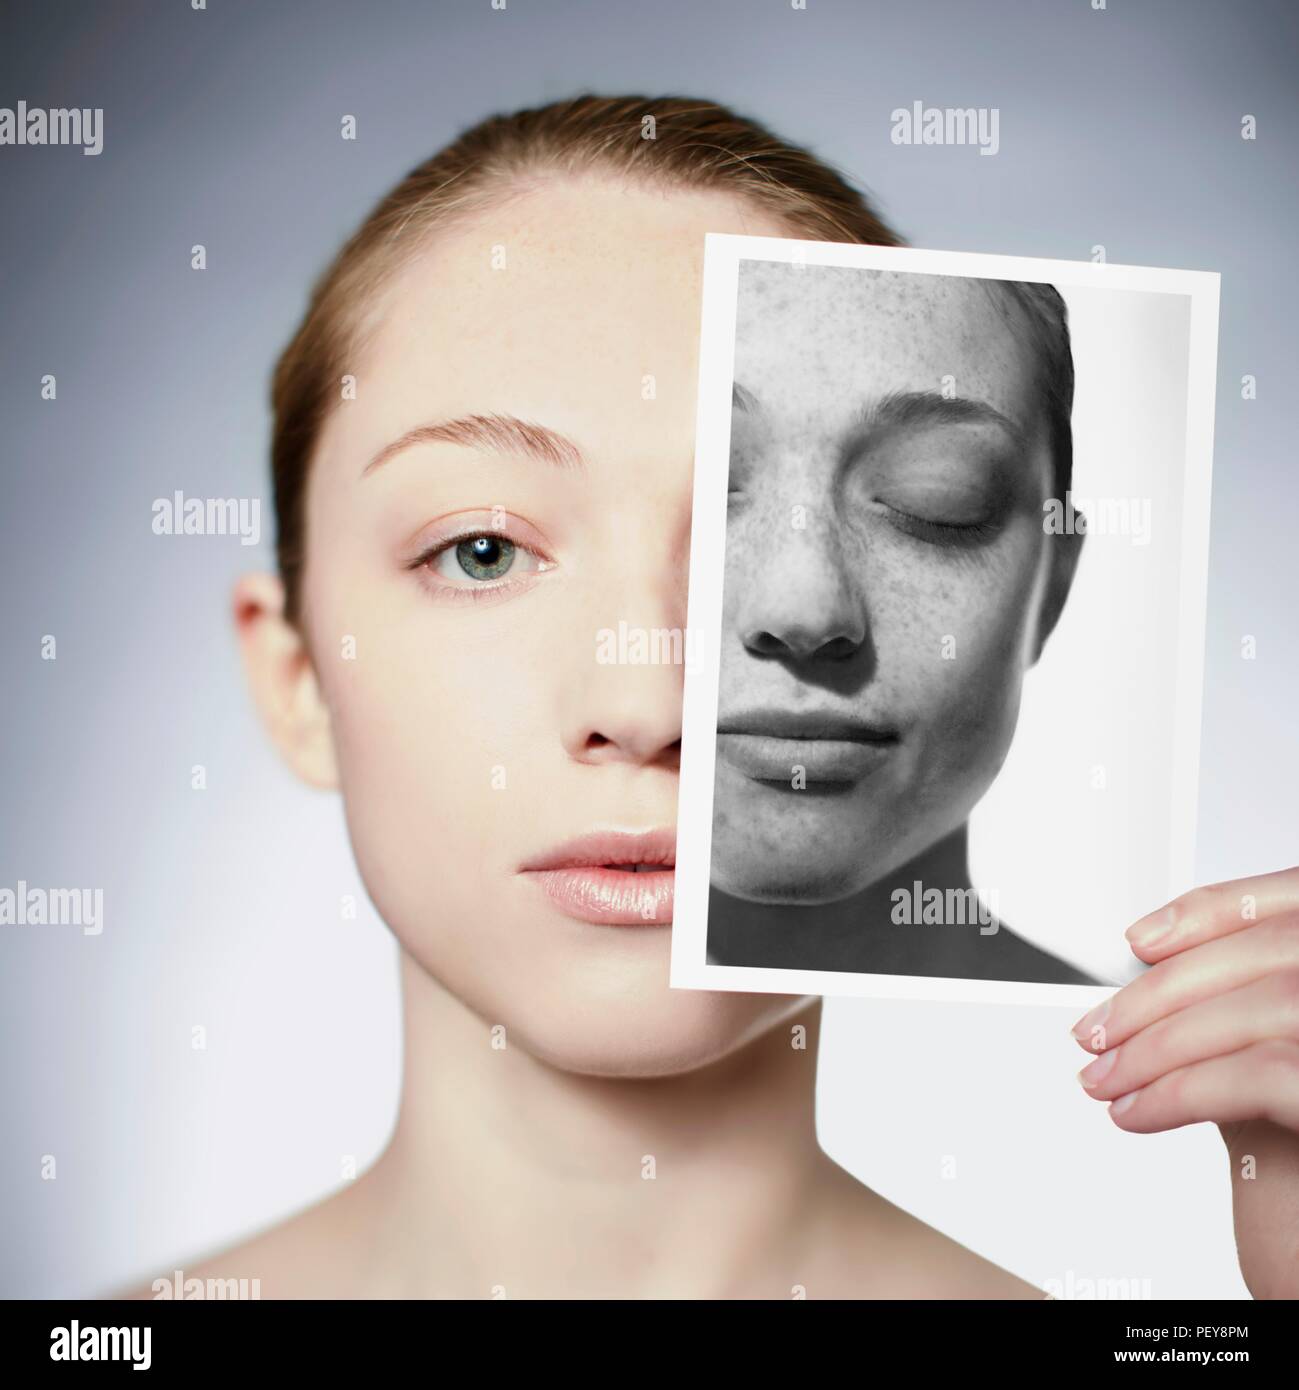 Sun damage. Woman holding a photograph in front of her face showing the damage sun exposure has done to her skin. Stock Photo